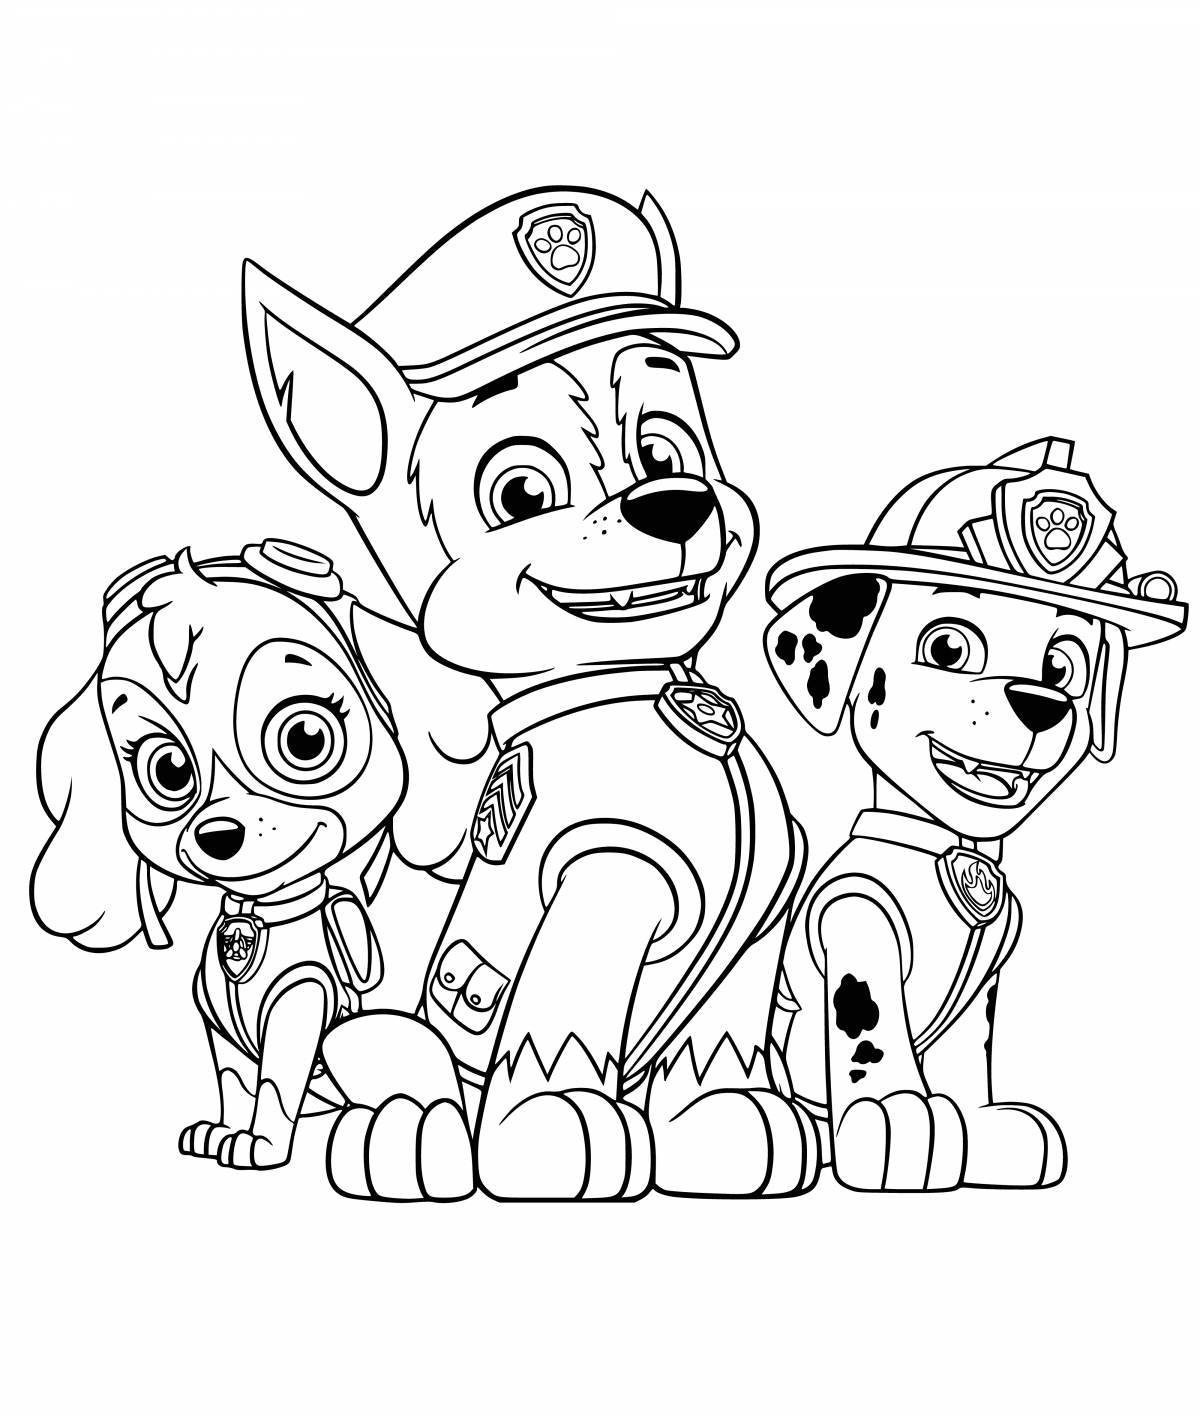 Charming marshal coloring book